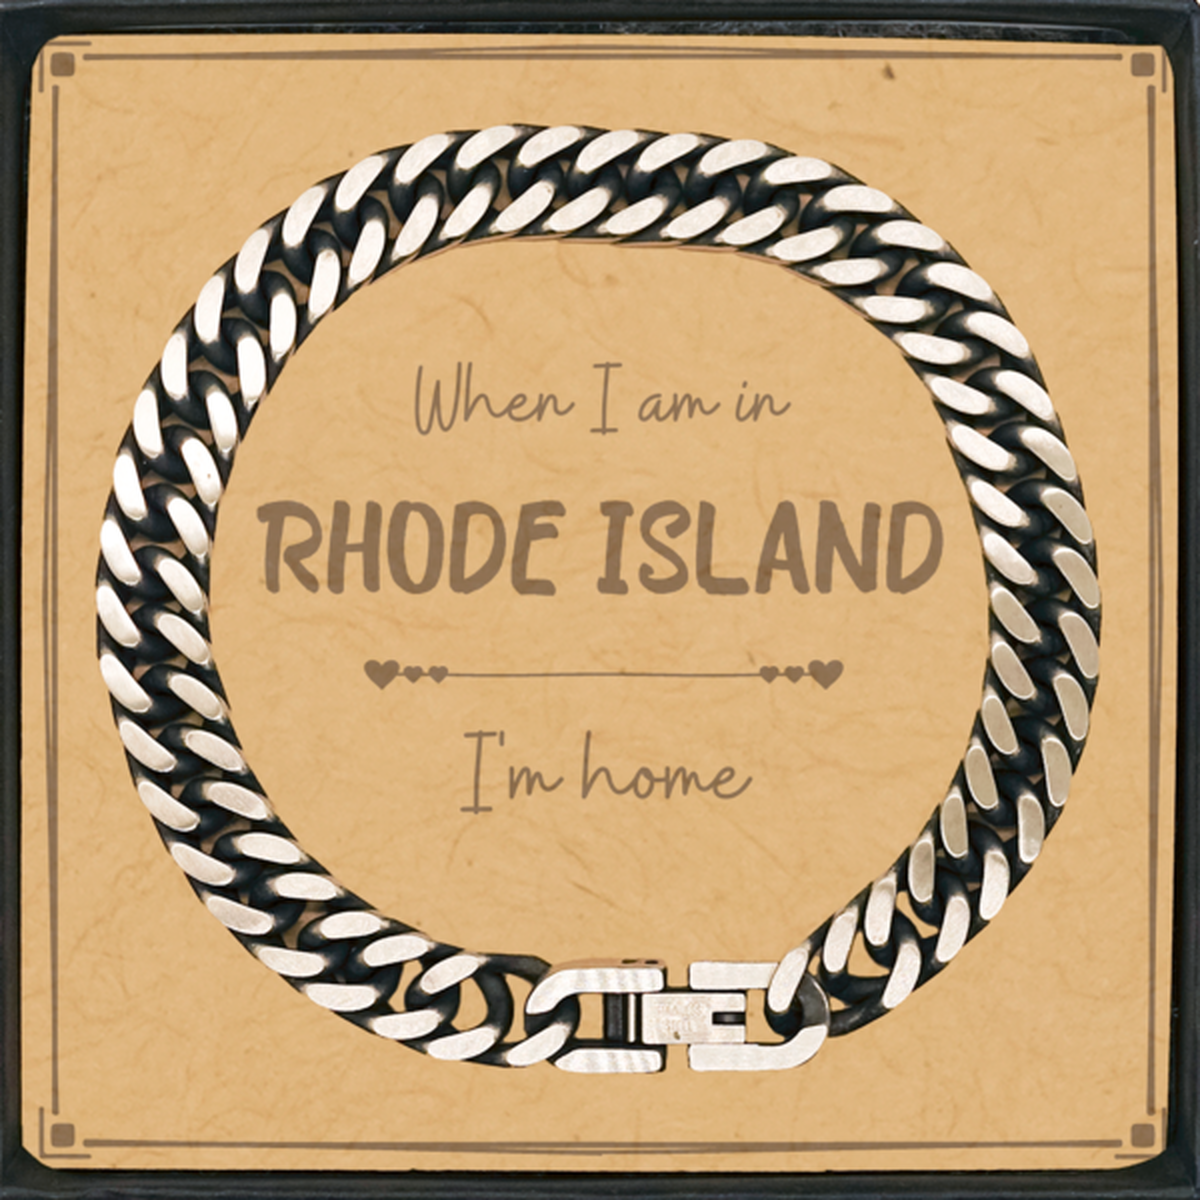 When I am in Rhode Island I'm home Cuban Link Chain Bracelet, Message Card Gifts For Rhode Island, State Rhode Island Birthday Gifts for Friends Coworker